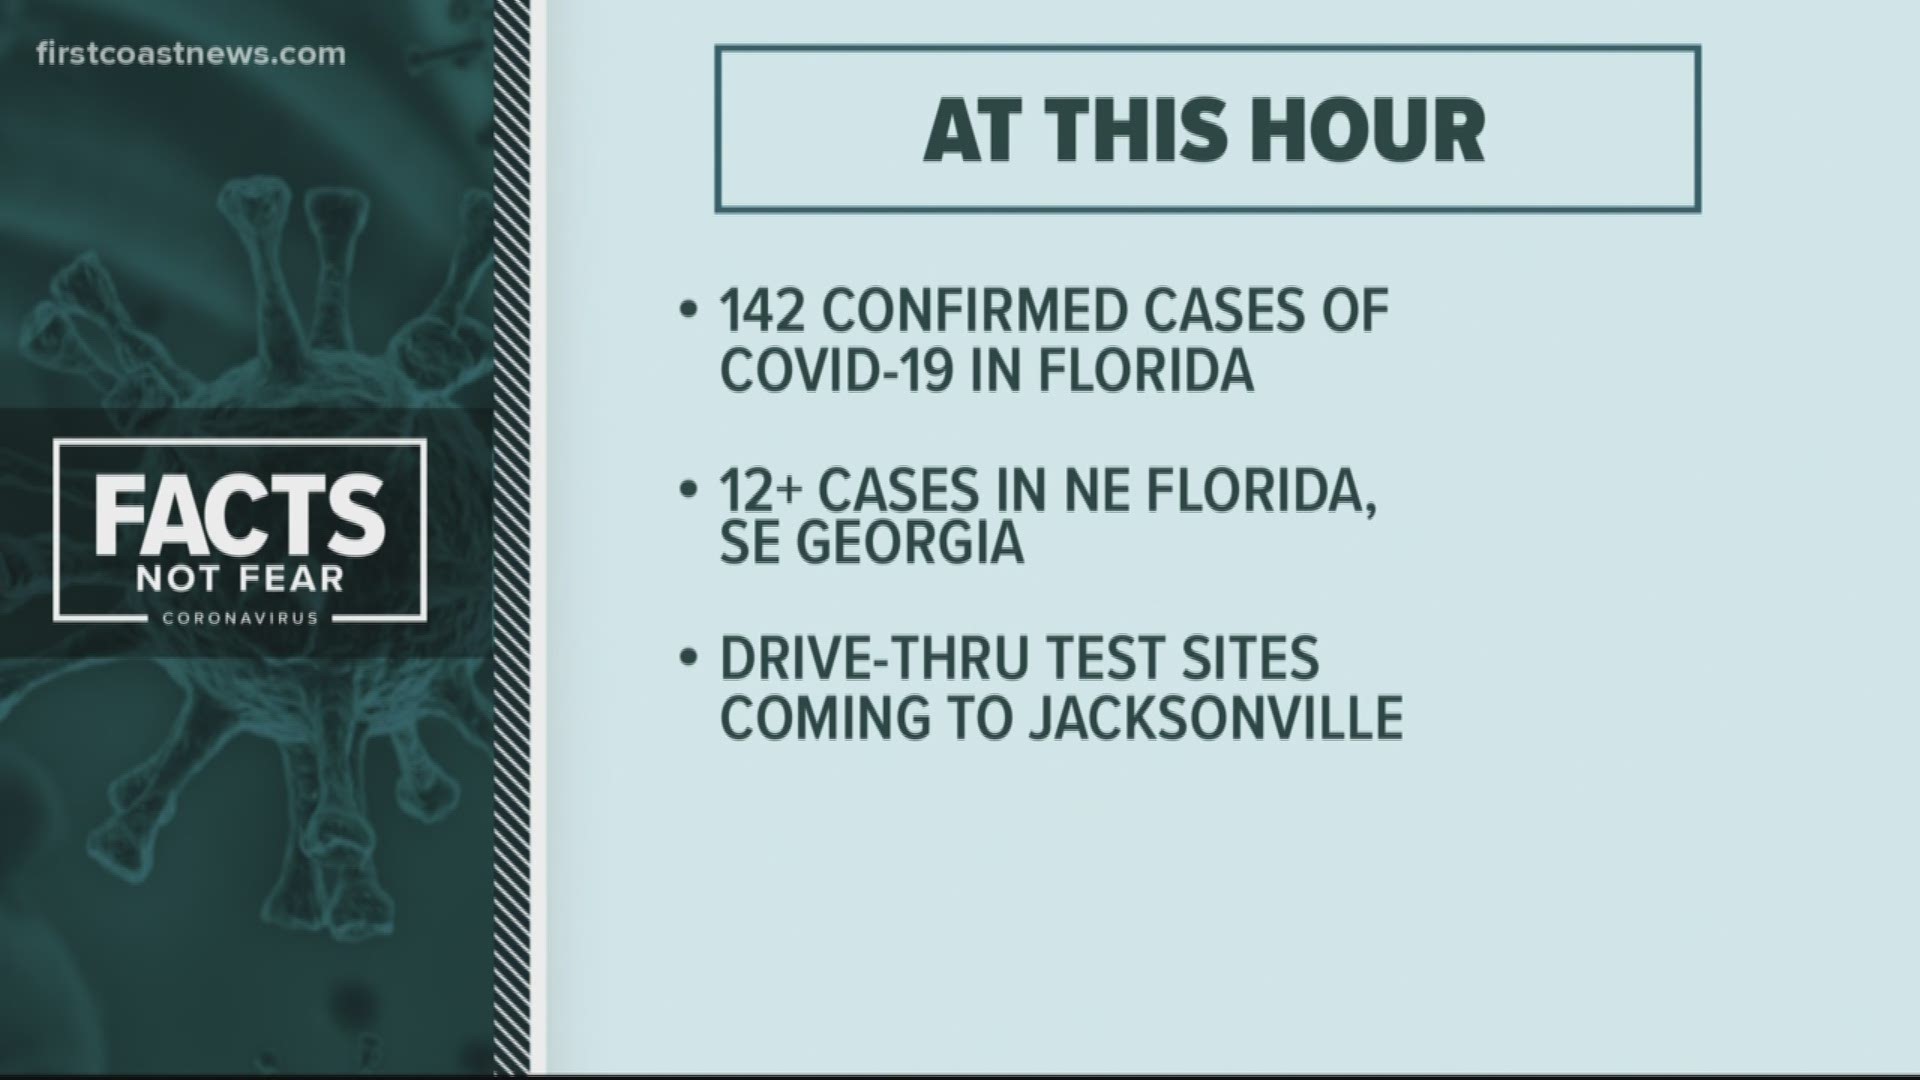 The Florida Department of Health reports 142 Florida residents have tested positive for COVID-19 and that one person who tested positive has died in Orange County.